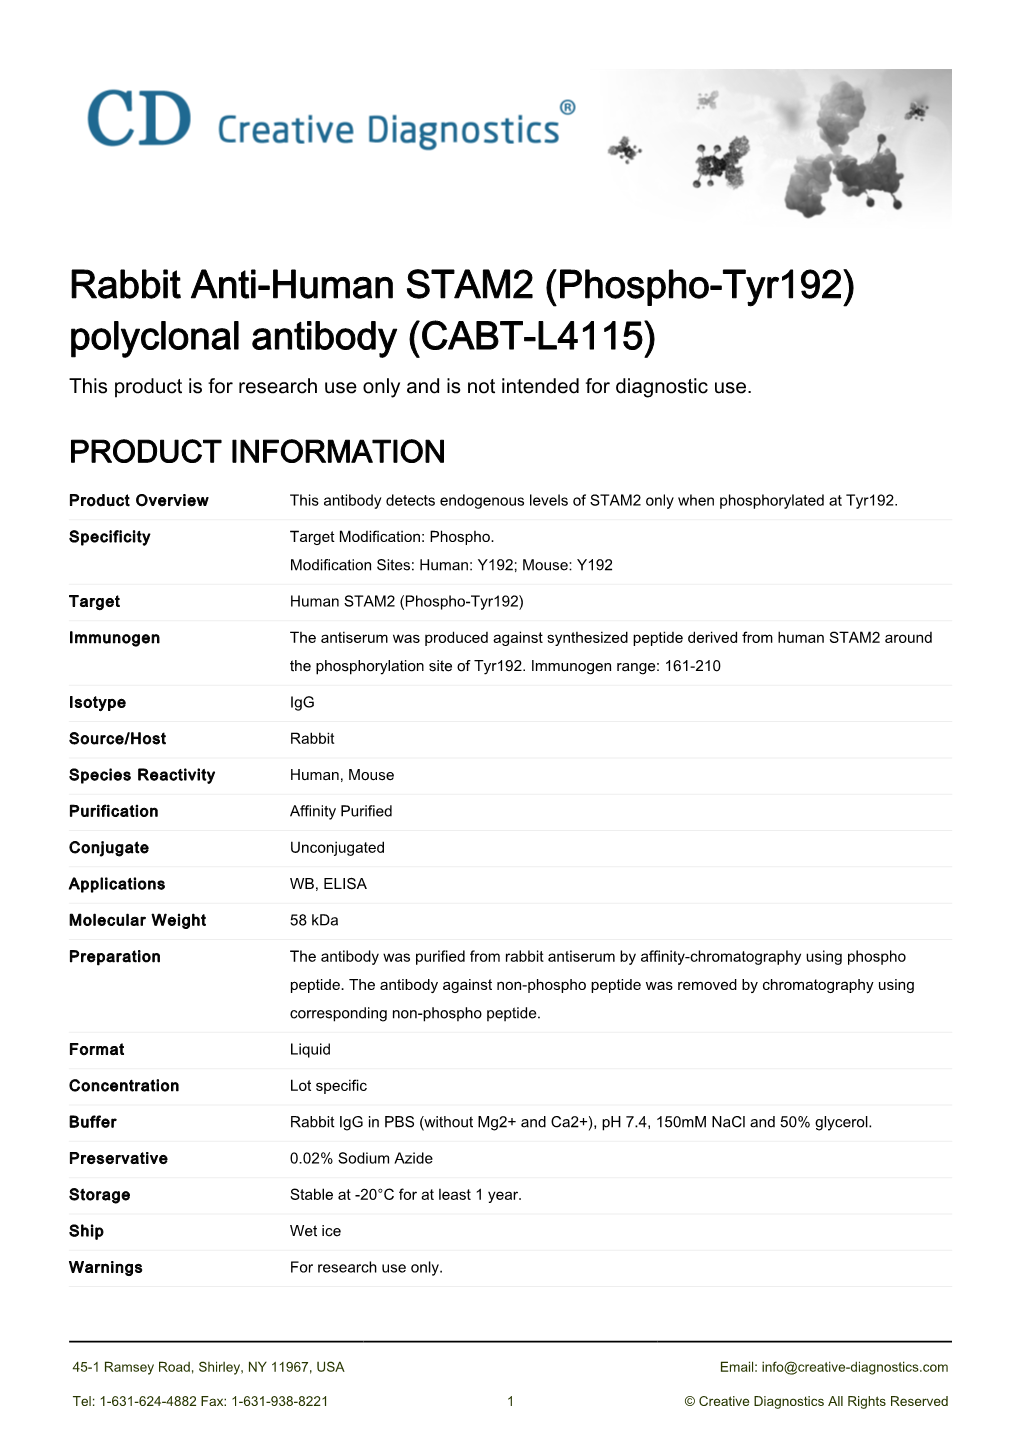 Rabbit Anti-Human STAM2 (Phospho-Tyr192) Polyclonal Antibody (CABT-L4115) This Product Is for Research Use Only and Is Not Intended for Diagnostic Use